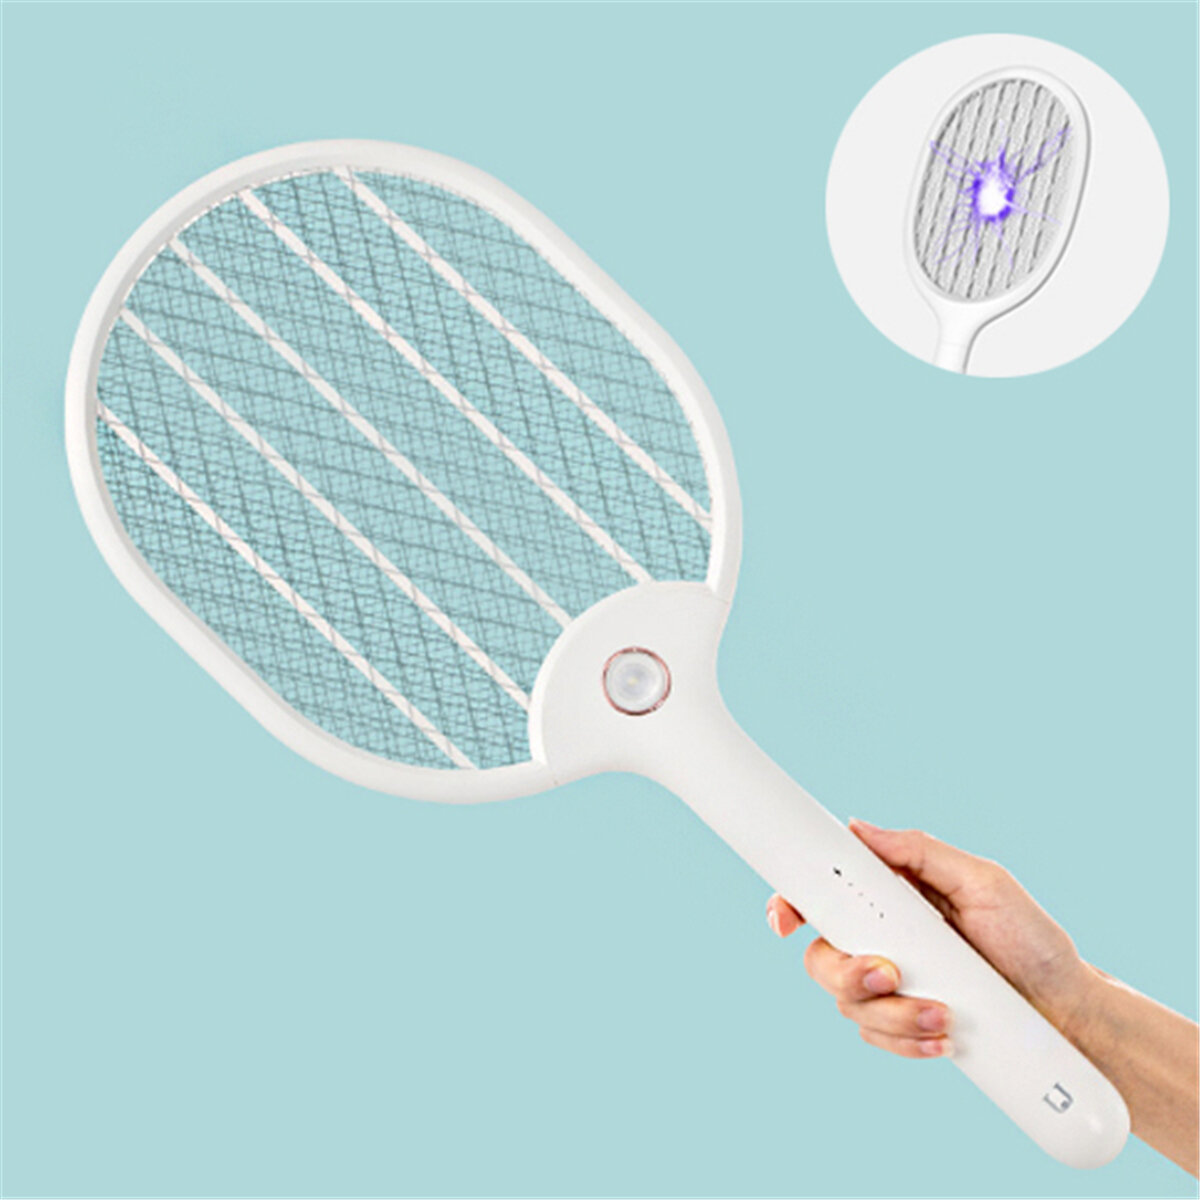 3PCS Jordan&judy 3000V Electric Mosquito Swatter Portable Insect Repellent Travel Three-layer Anti-electric Shock Net USB Charging Mosquito Dispeller from 